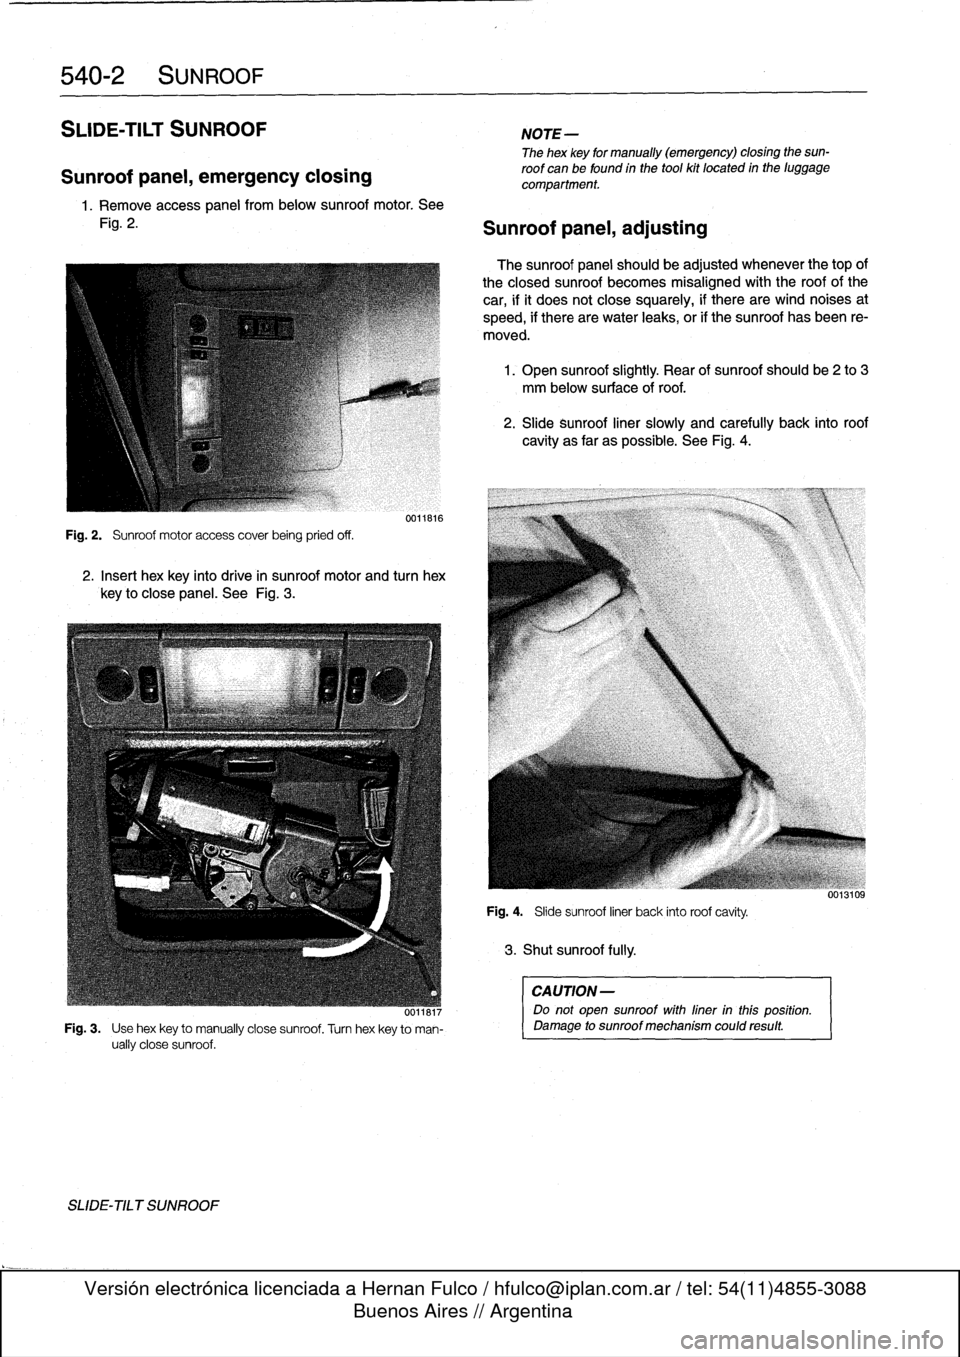 BMW M3 1996 E36 Workshop Manual 
540-2
SUNROOF

SLIDE-TILT
SUNROOF

Sunroof
panel,
emergency
closing

1.
Remove
access
panel
frombelow
sunroof
motor
.
See

Fig
.
2
.

Fig
.
2
.

	

Sunroof
motor
access
coverbeing
pried
off
.

001181